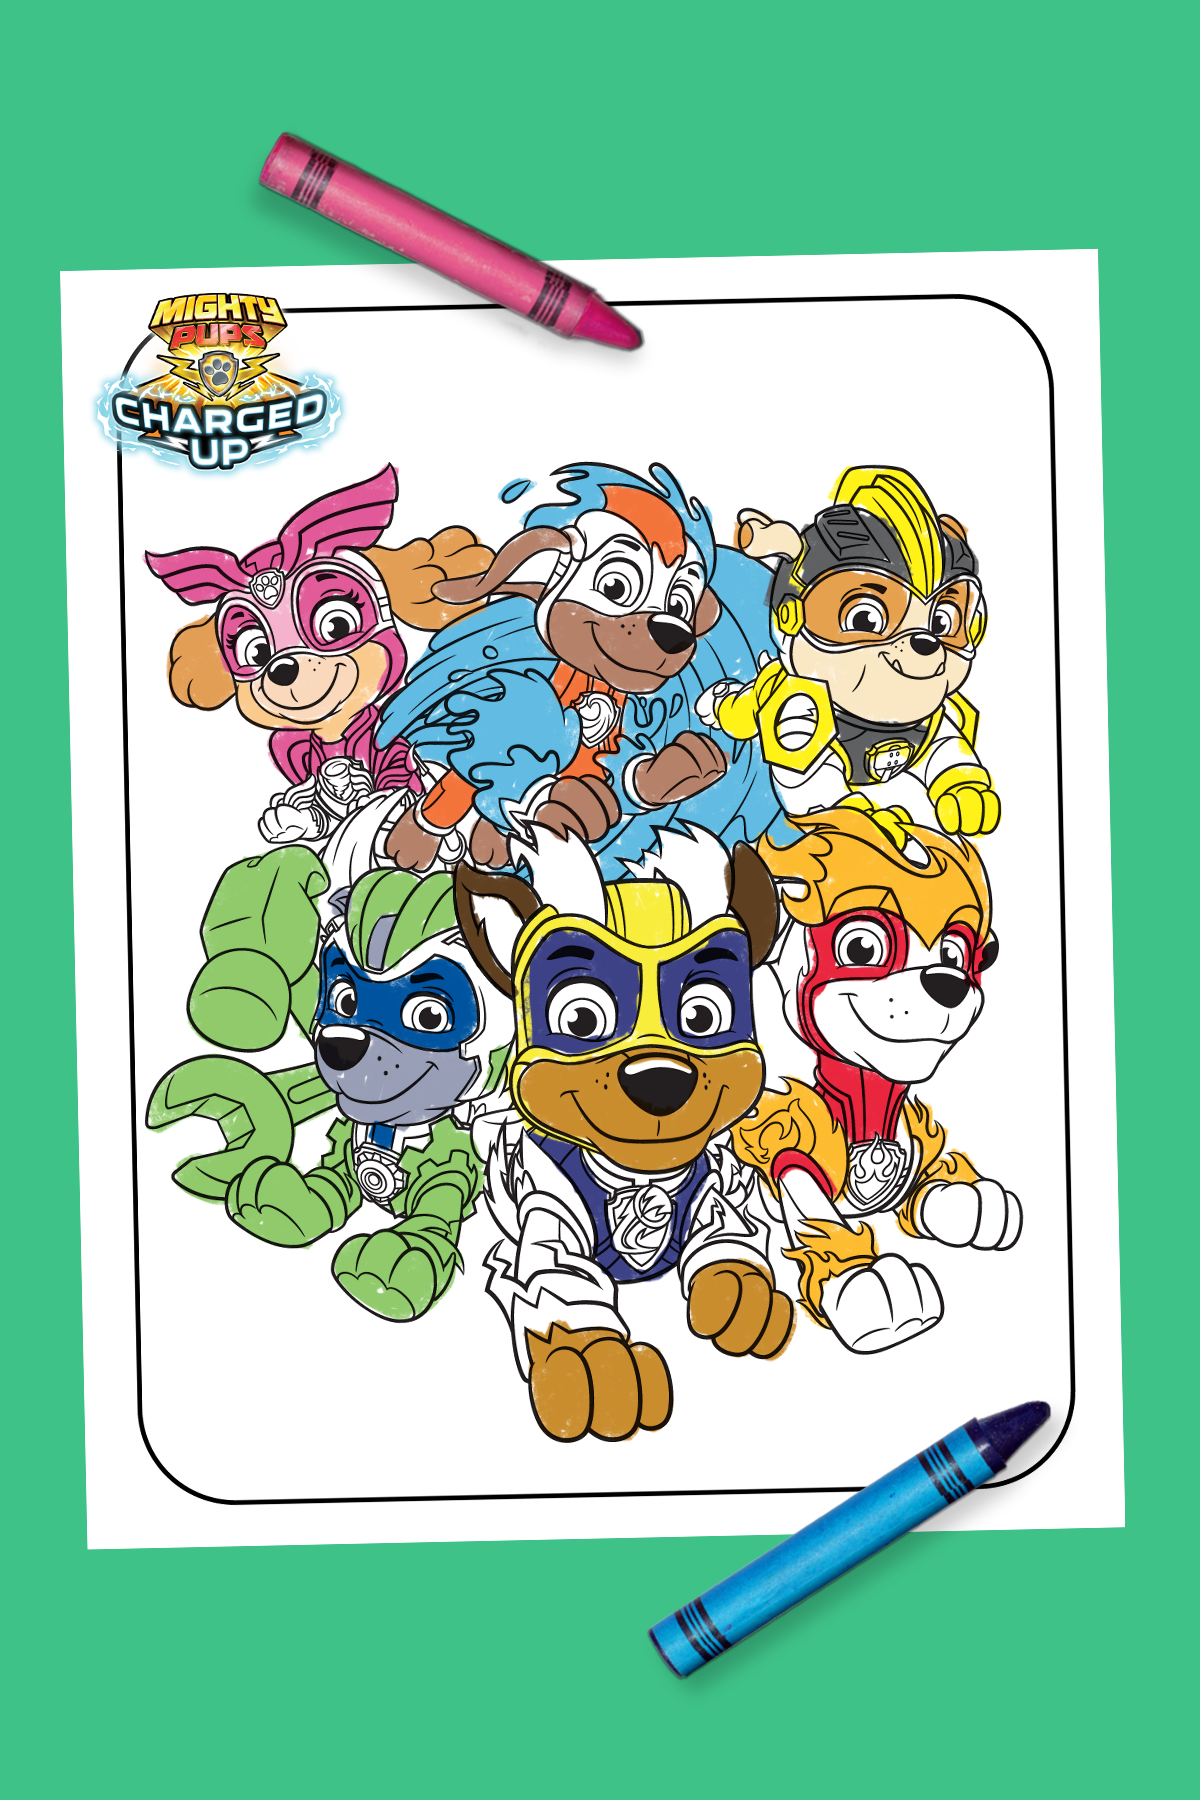 PAW Patrol Mighty Pups Charged Up